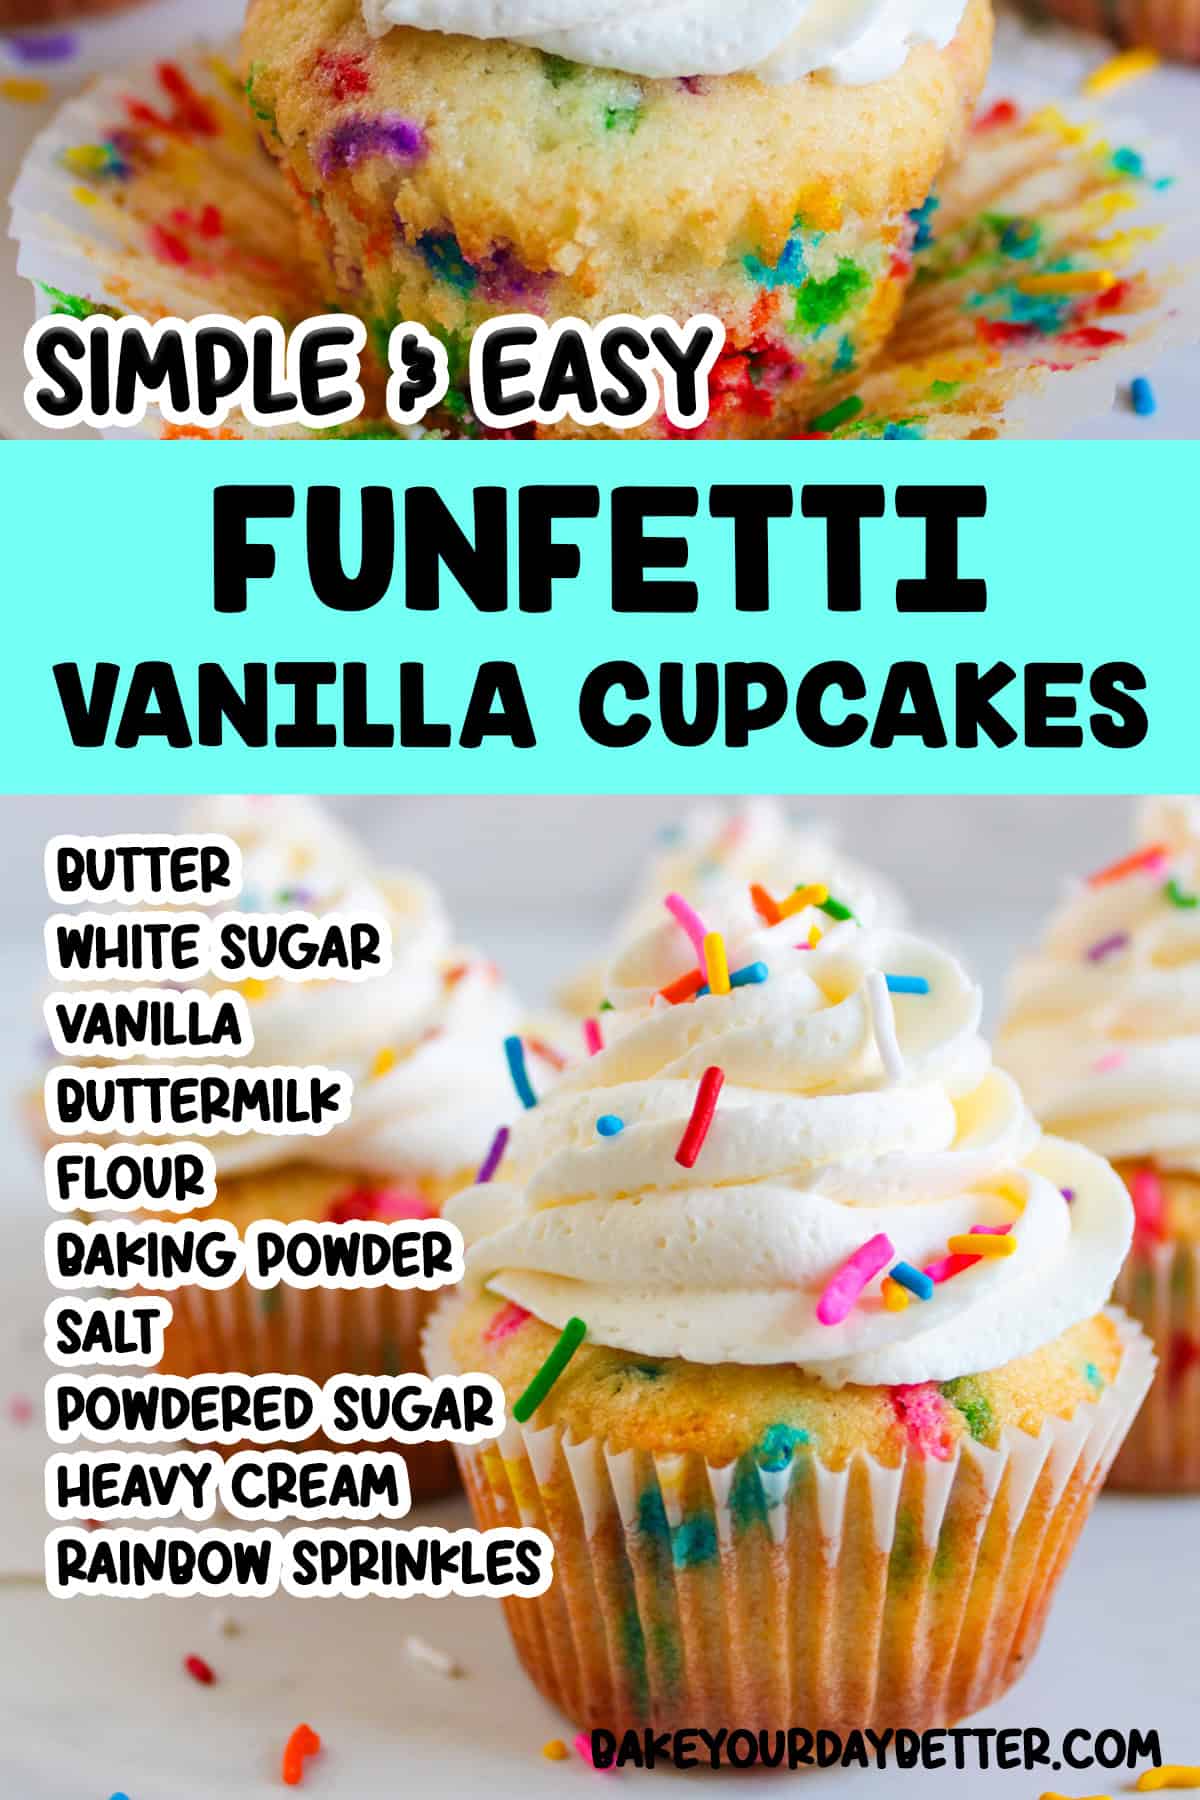 pictures of funfetti vanilla cupcakes with text overlay that says: simple and easy funfetti vanilla cupcakes and a list of ingredients